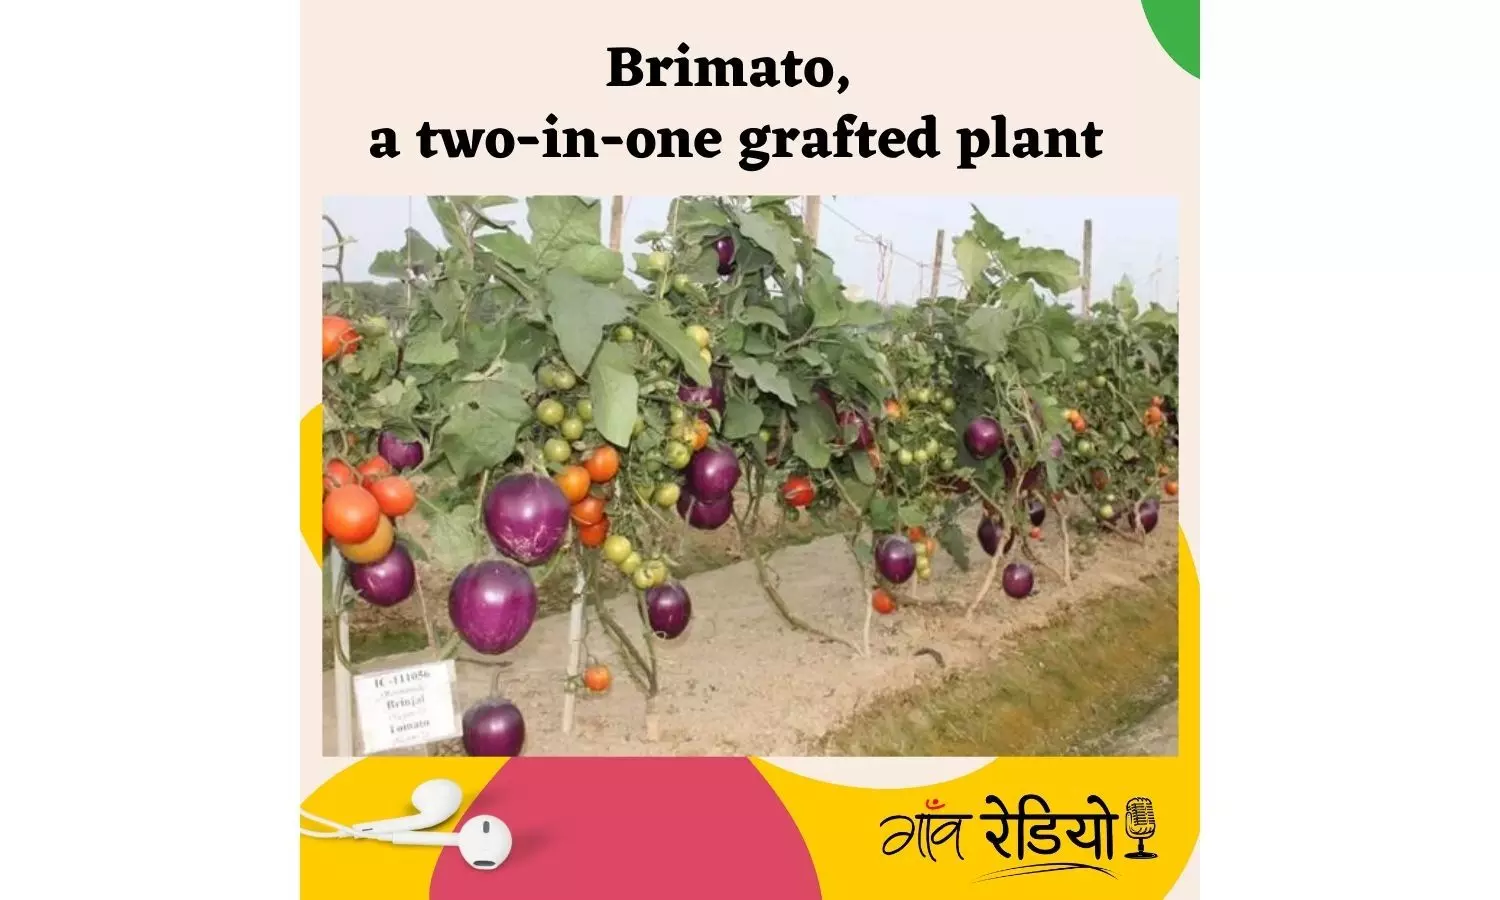 Gaon Radio: Hear out the story of Brimato — a two-in-one grafted plant that grows both tomato and brinjal